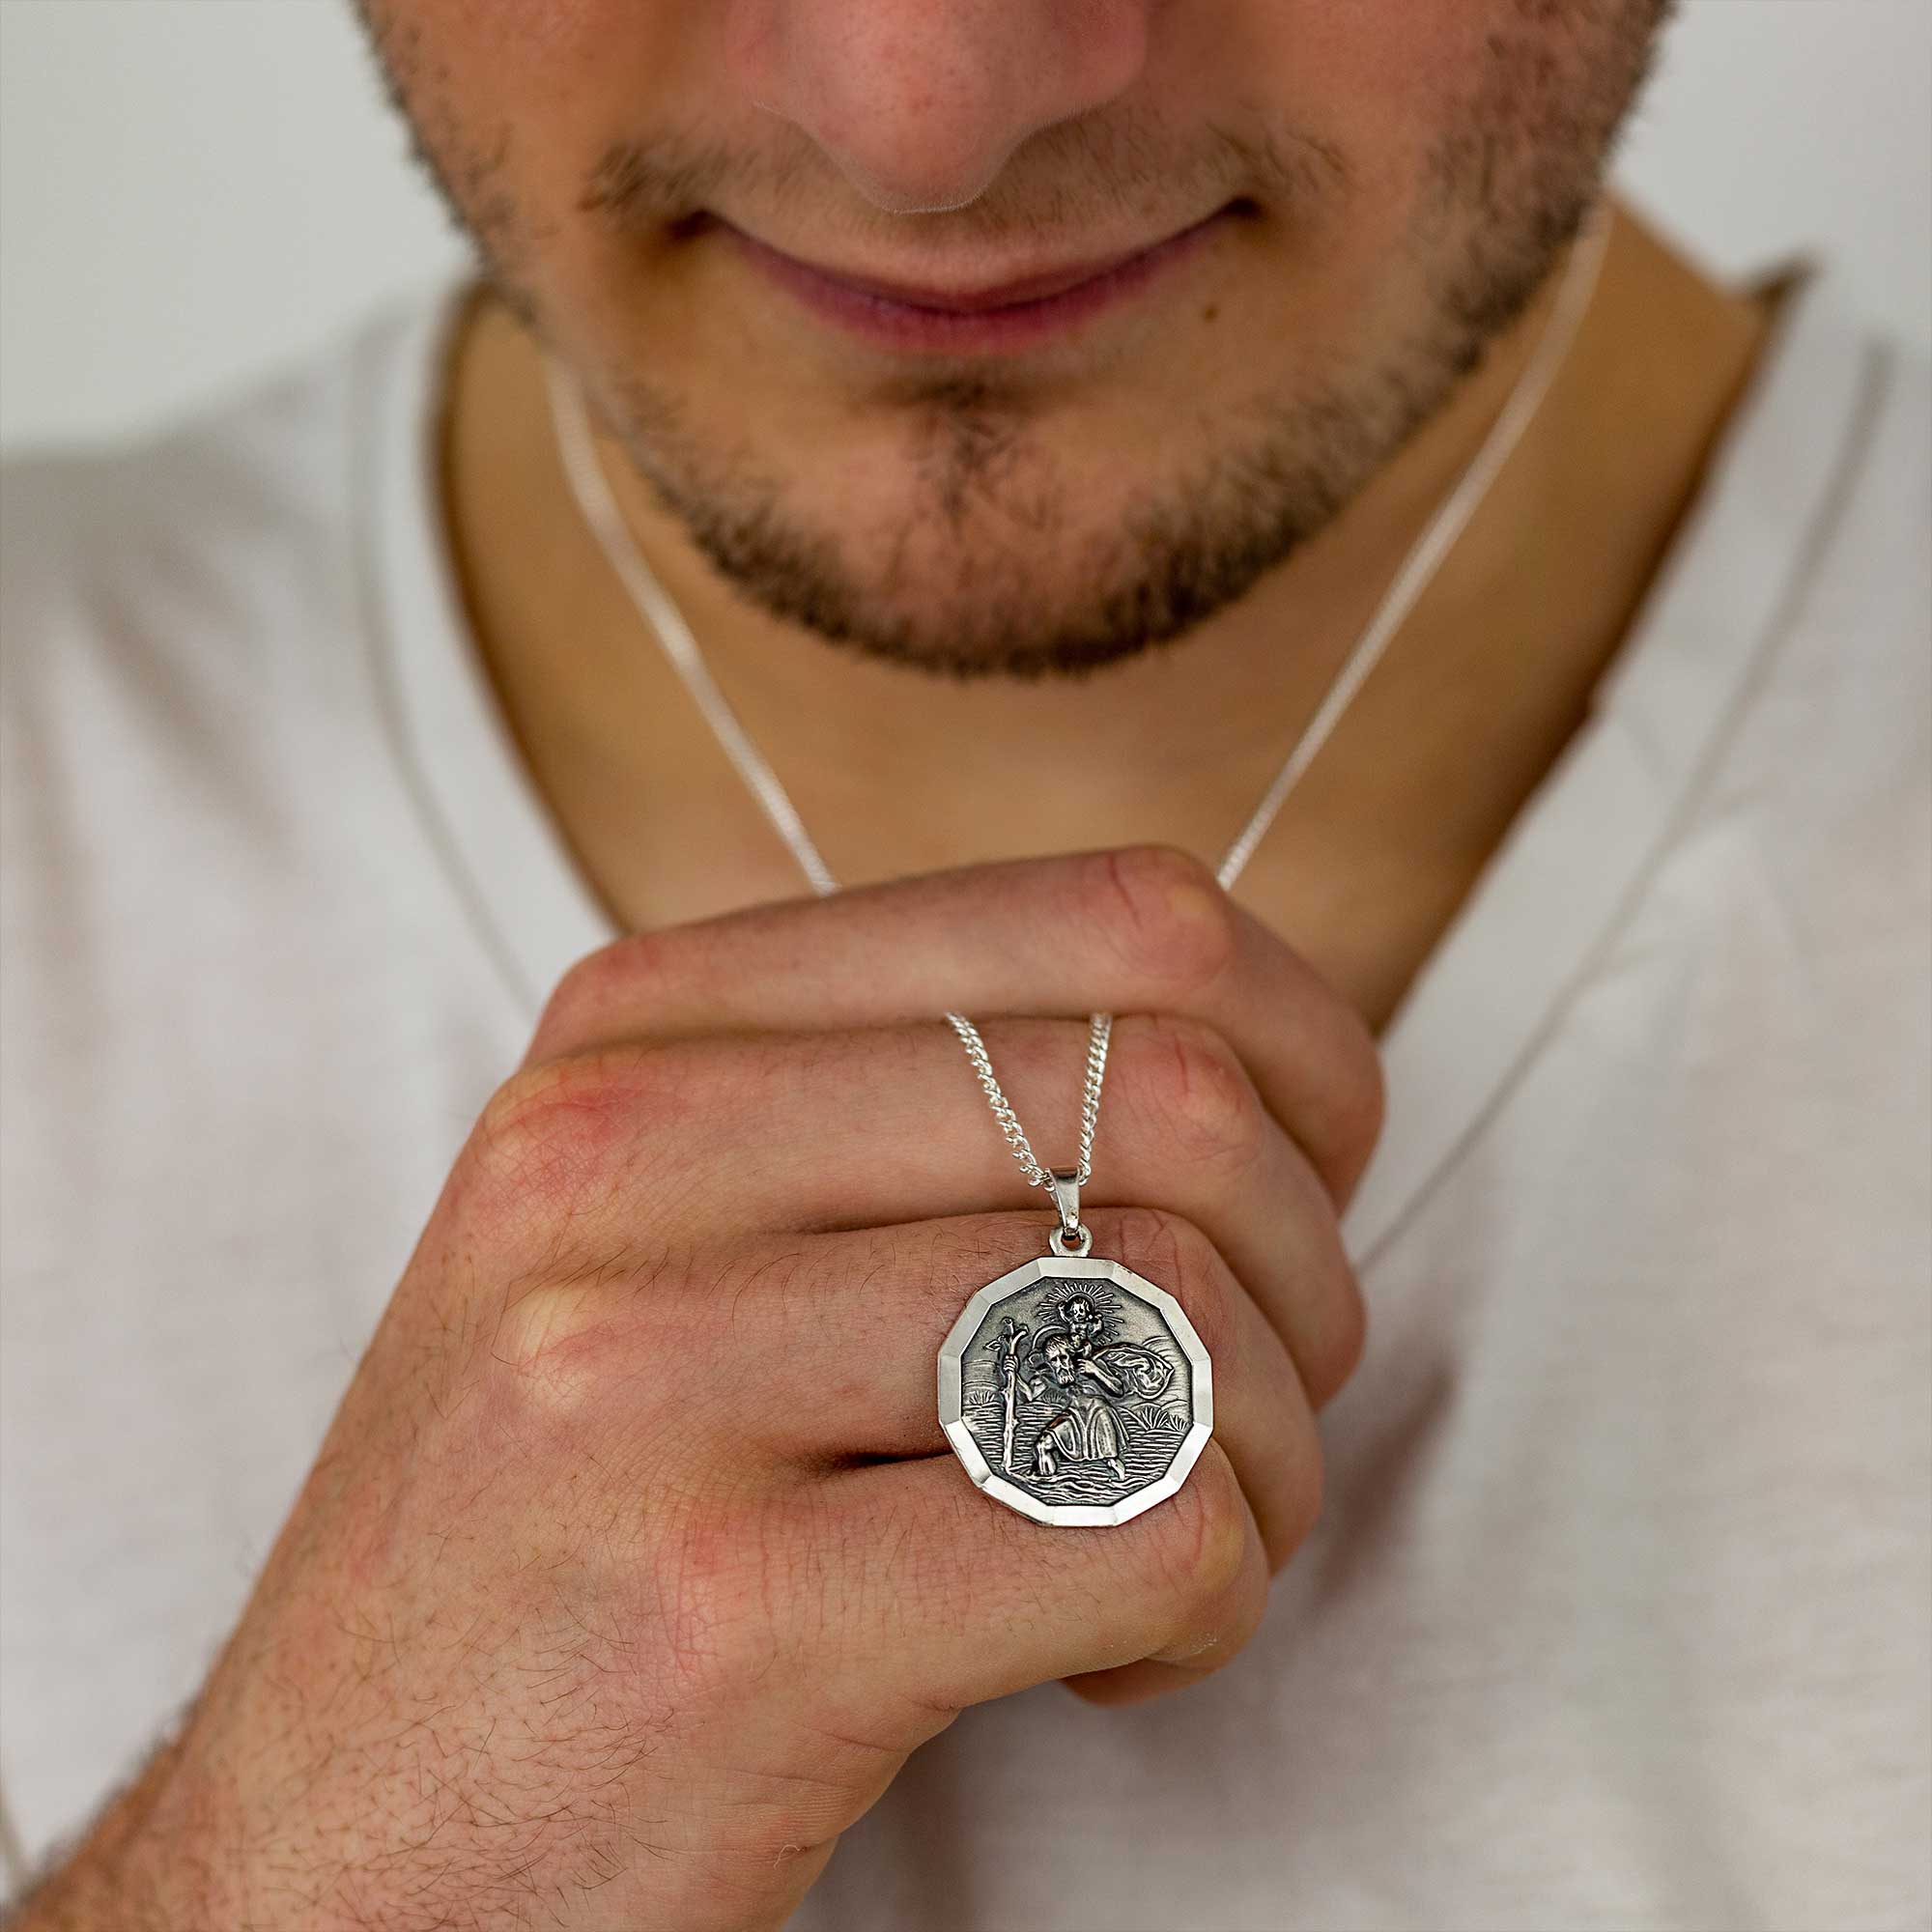 large dodecagon 12 sided saint christopher necklace for men 18th 21st 16th birthday gift for son grandson